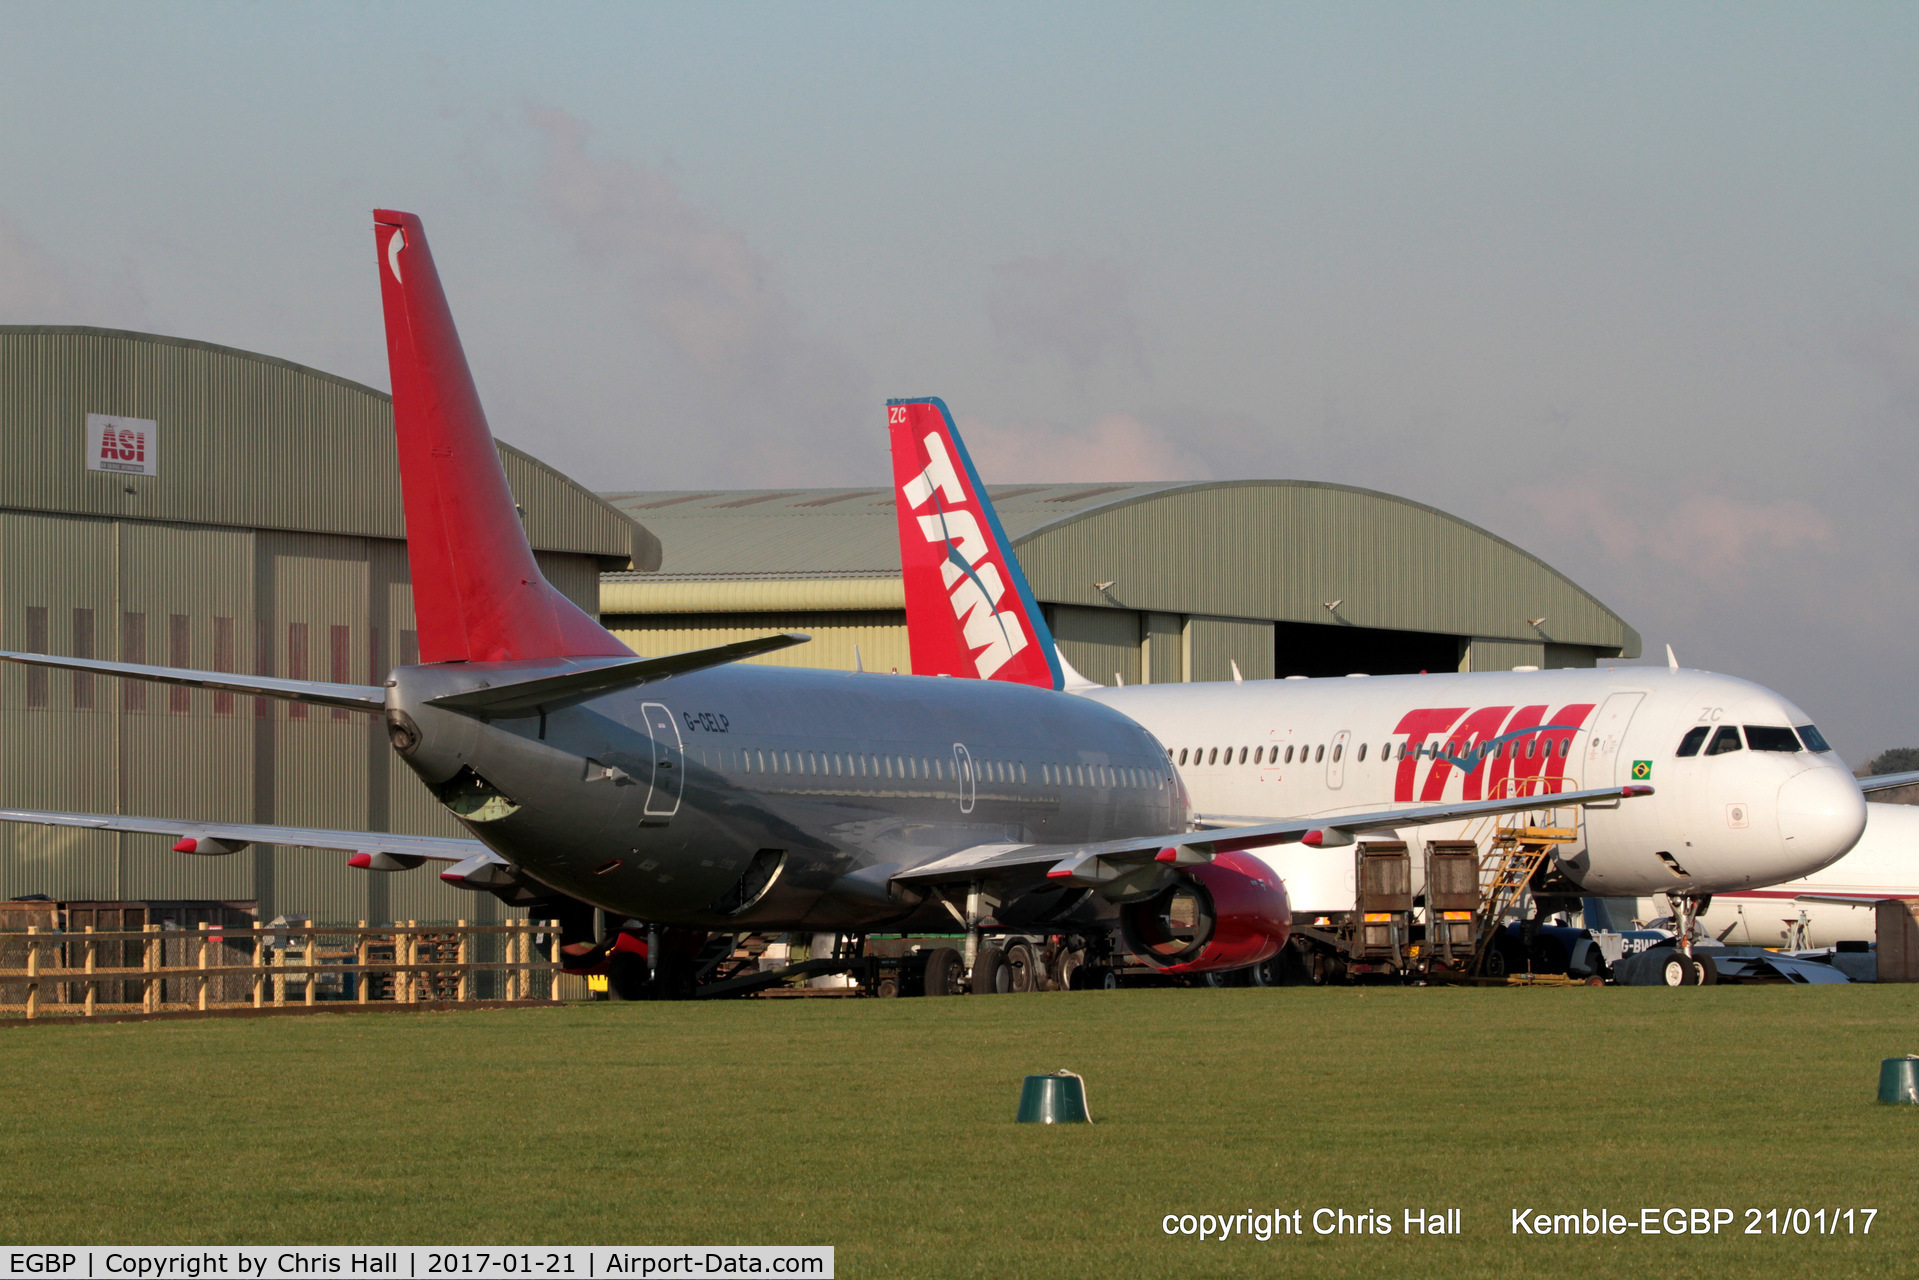 Kemble Airport, Kemble, England United Kingdom (EGBP) - Jet2 B737 and TAM A319 being parted out by ASI at Kemble